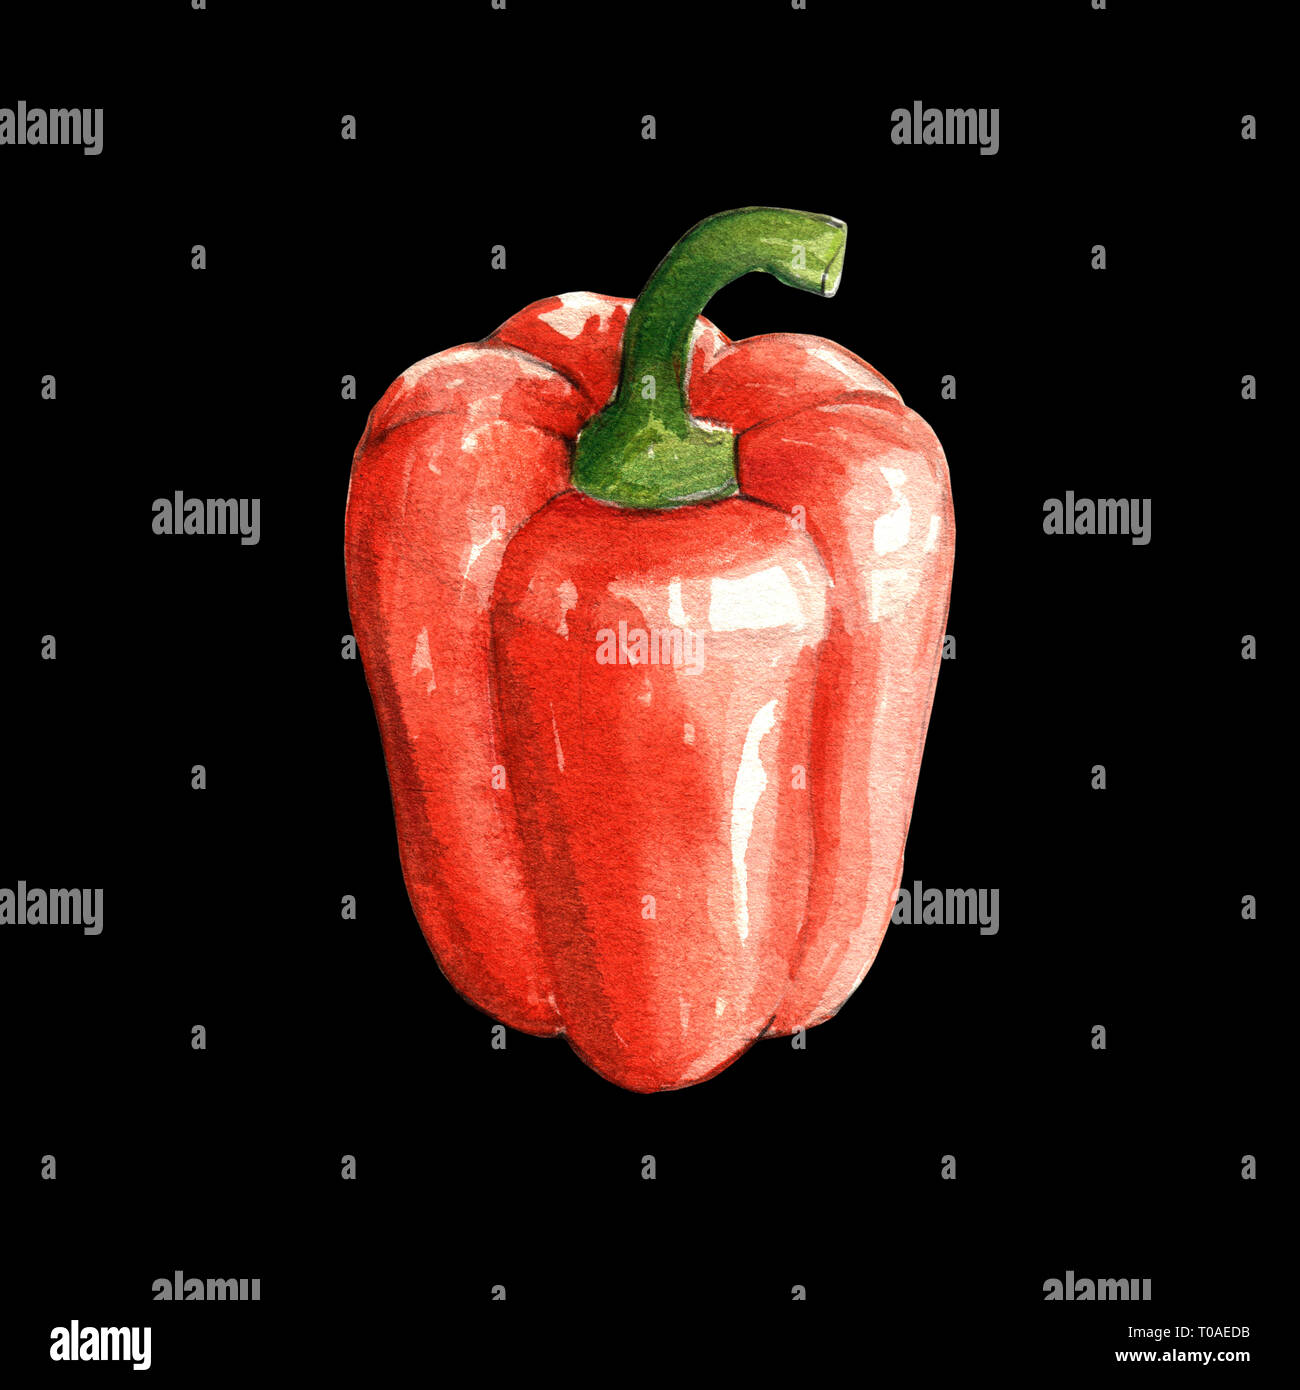 red bell pepper watercolor illustration on black background Stock Photo